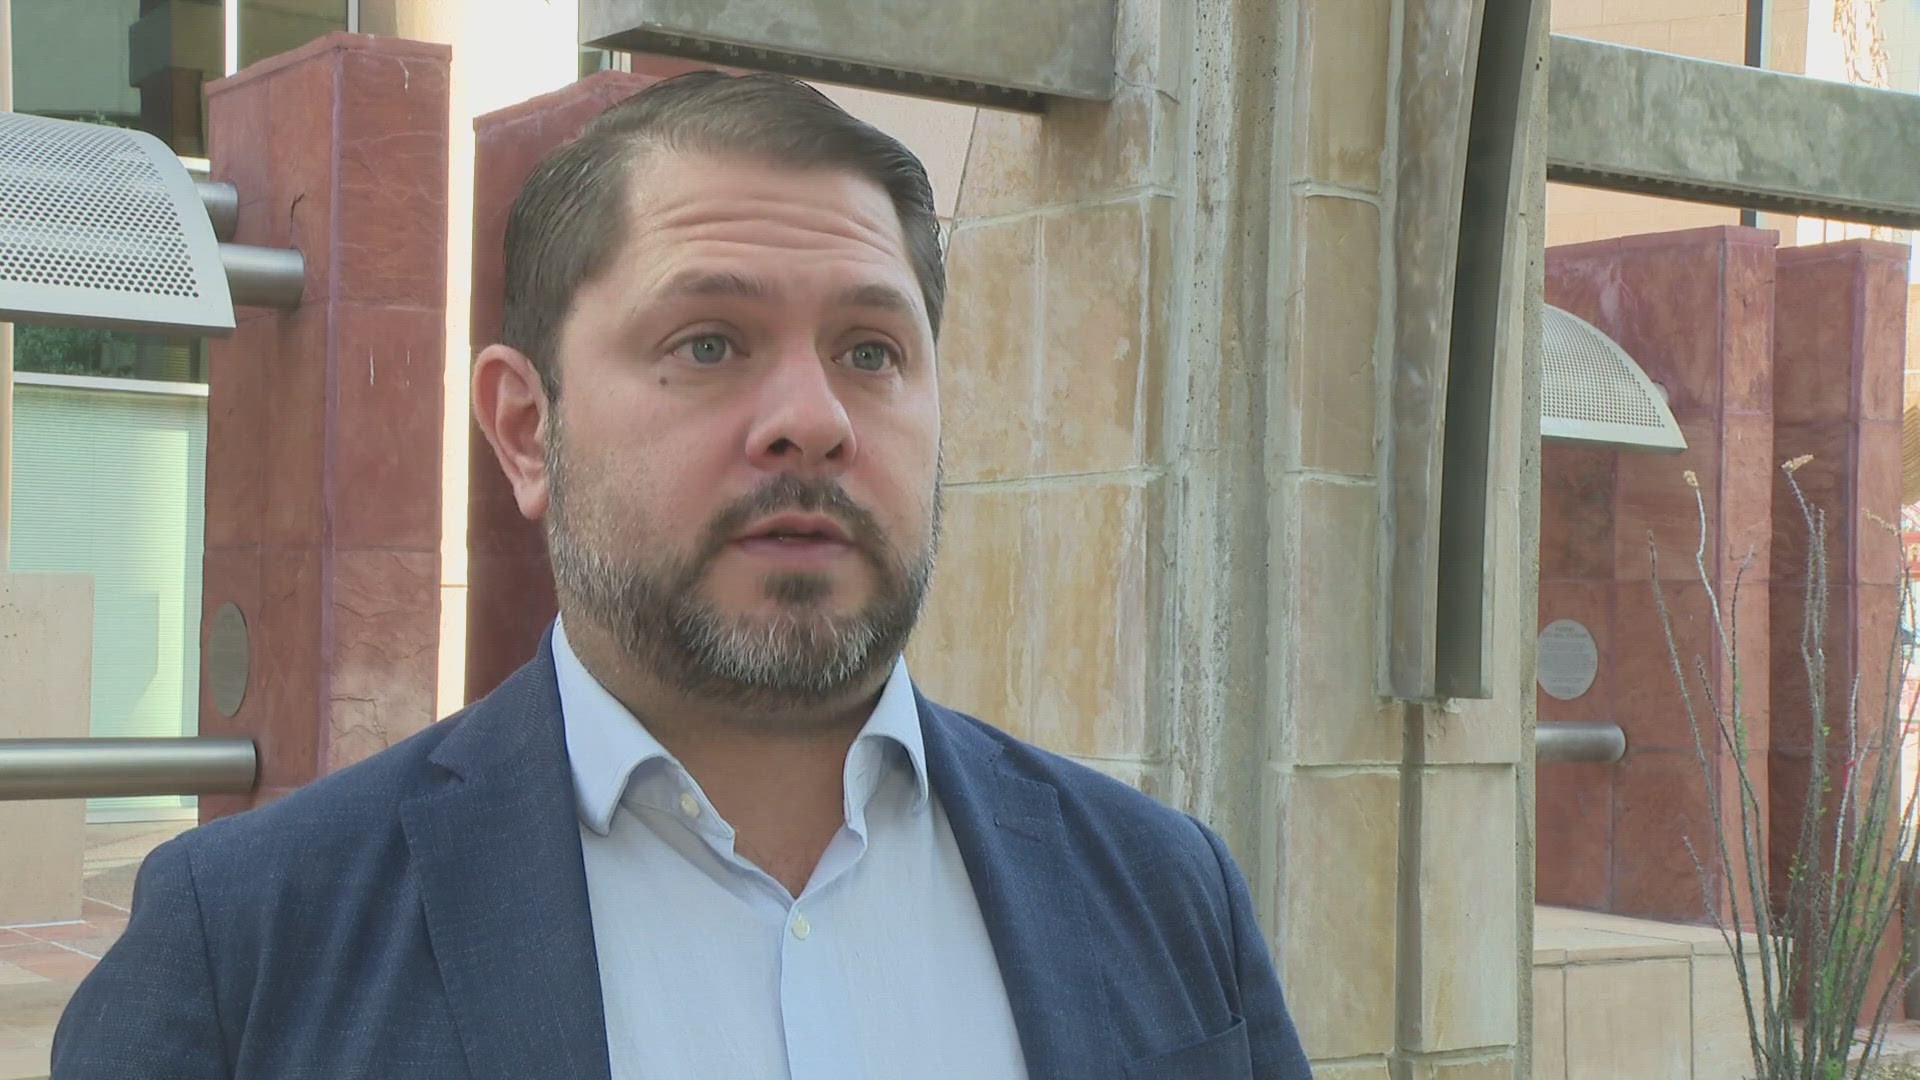 Arizona Congressman Ruben Gallego has introduced legislation that would have extreme heat be considered a major disaster by the Federal Emergency Management Agency.